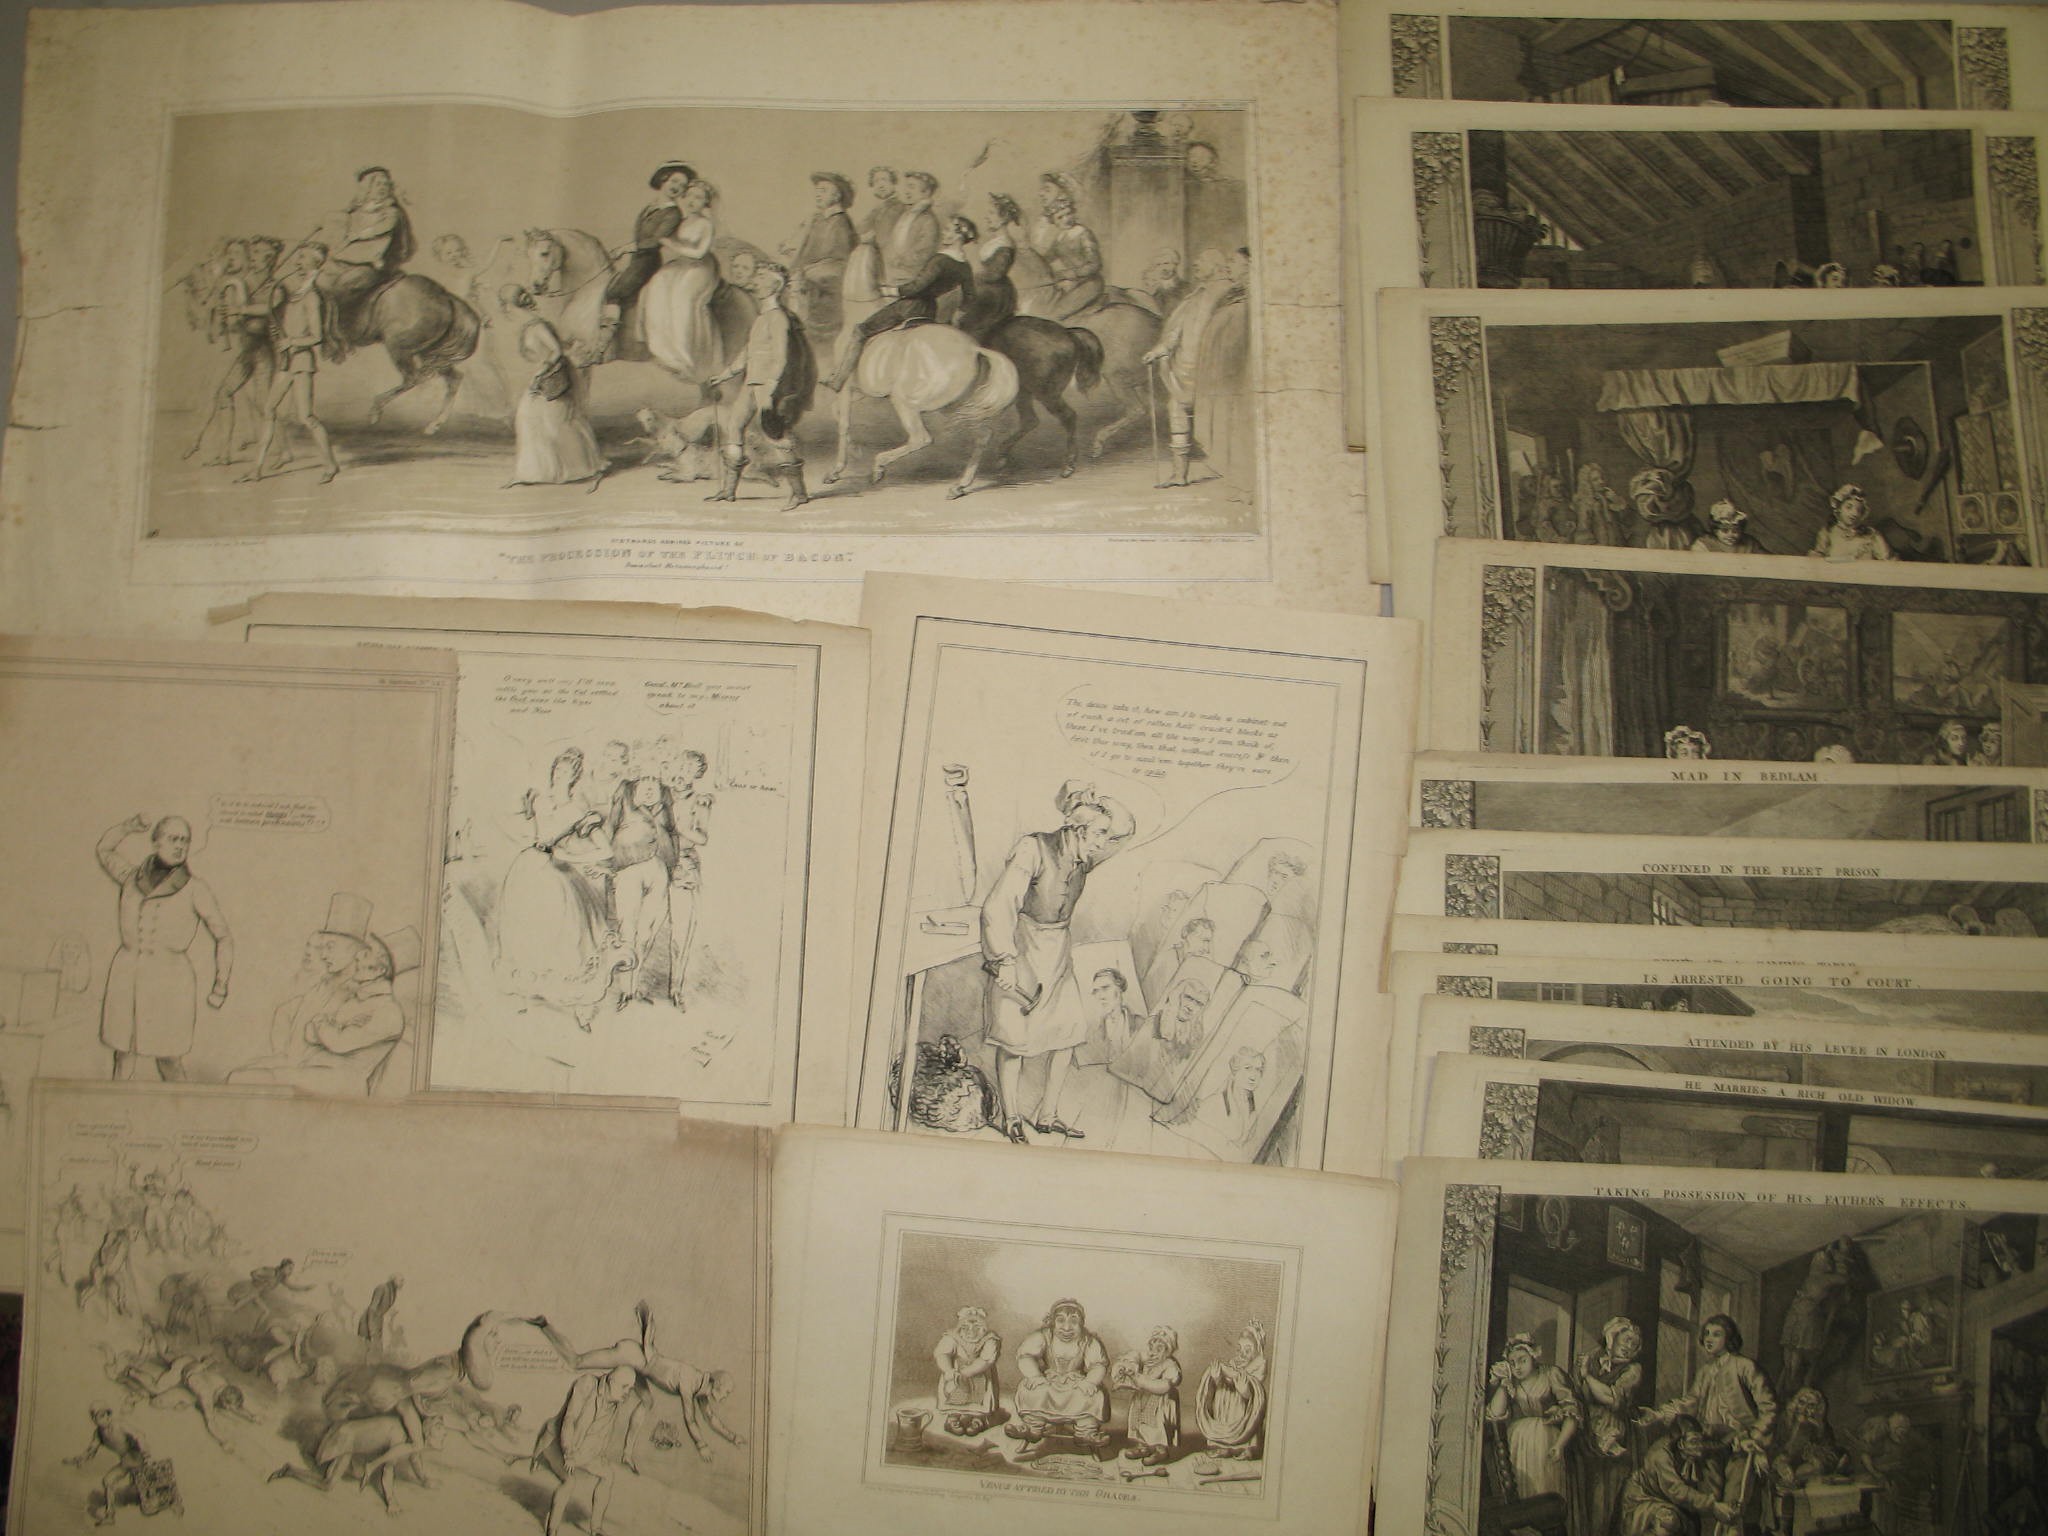 [SATIRE] coll'n of prints by Hogarth; satire of the STOTHARD / William Bake processional print